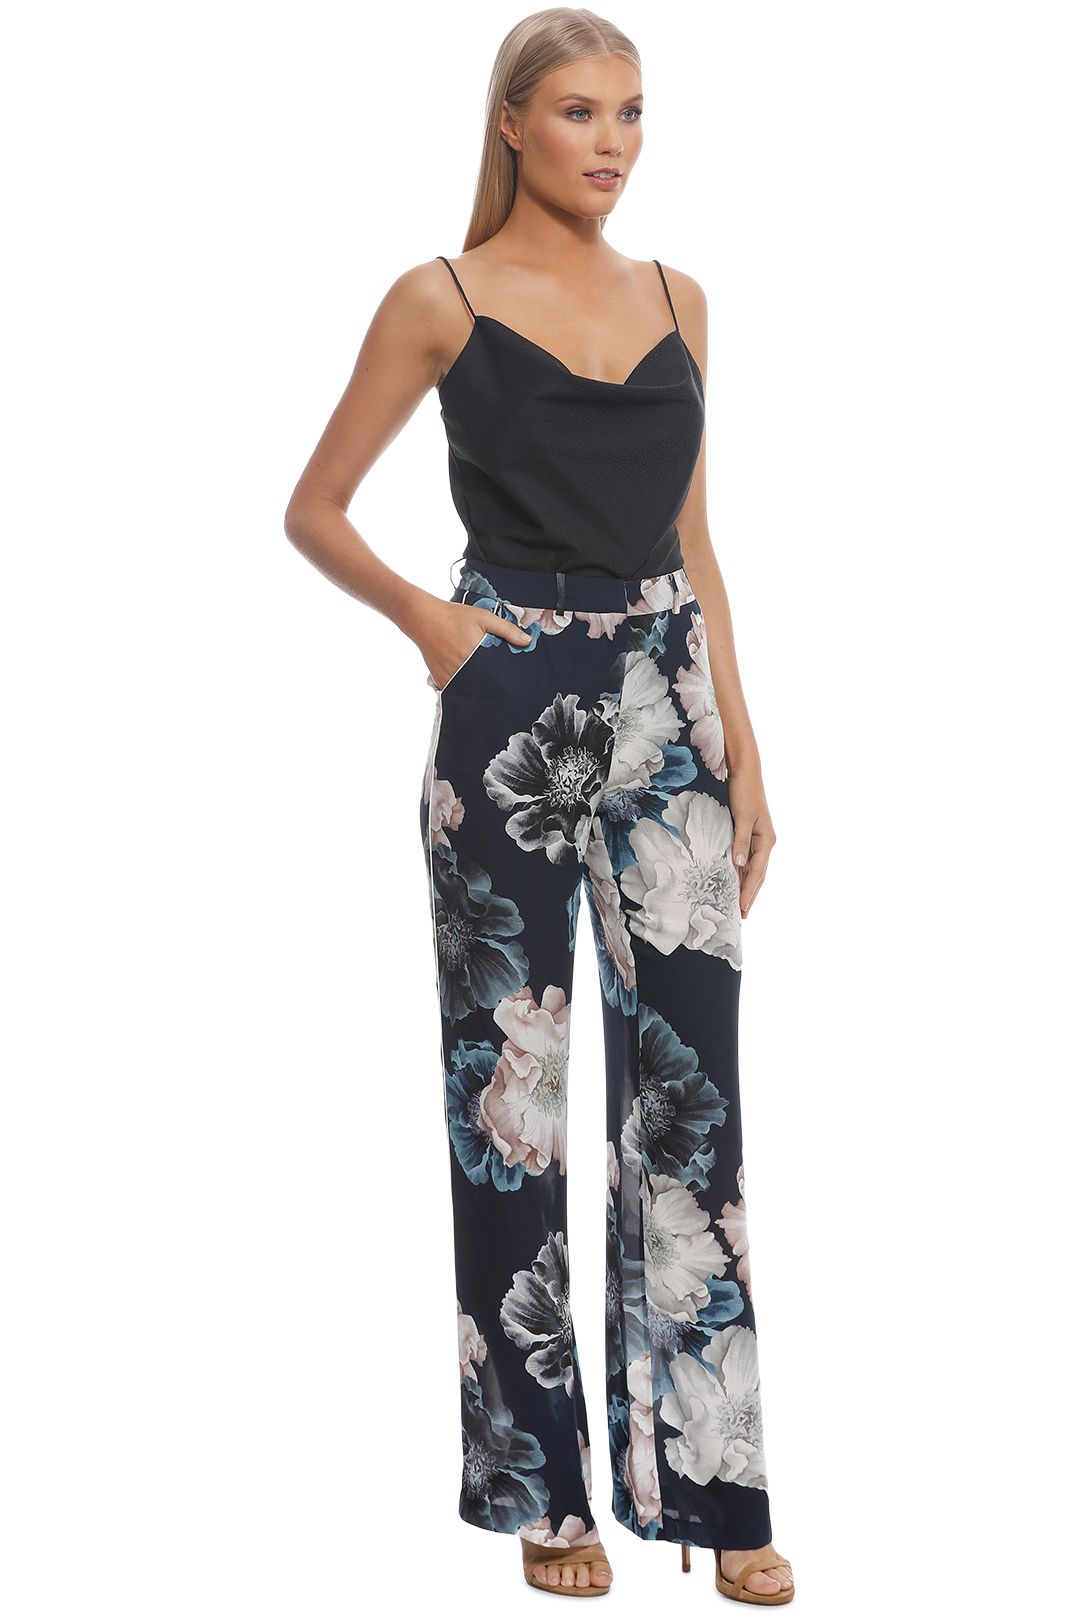 Nicholas The Label - Navy Floral Palazzo Pant - Navy - Side